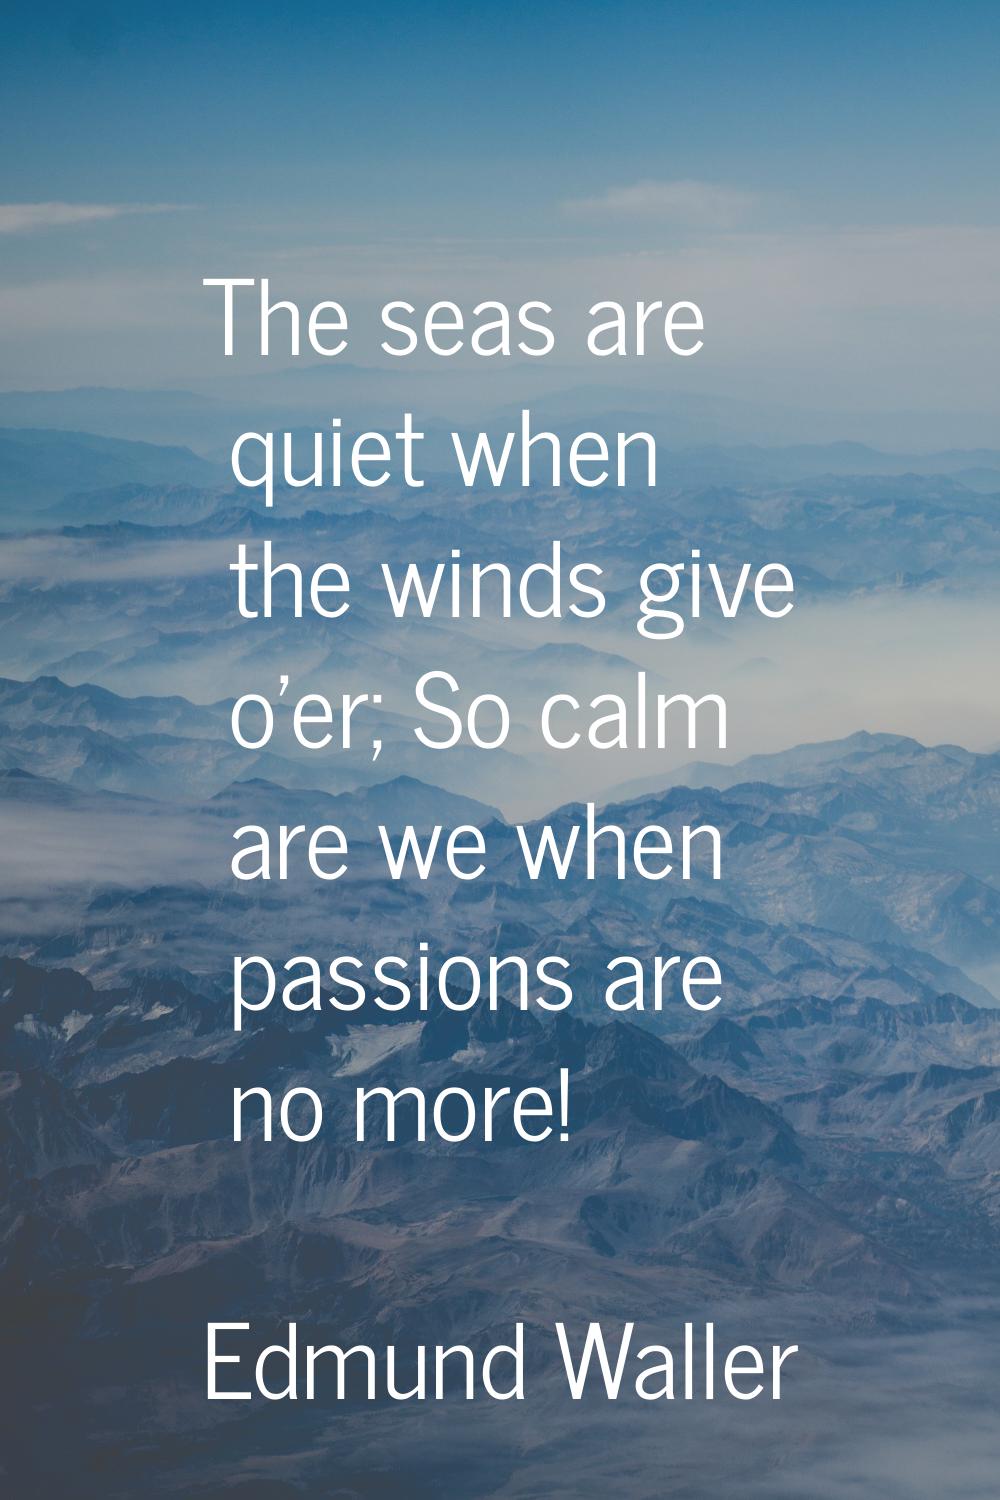 The seas are quiet when the winds give o'er; So calm are we when passions are no more!